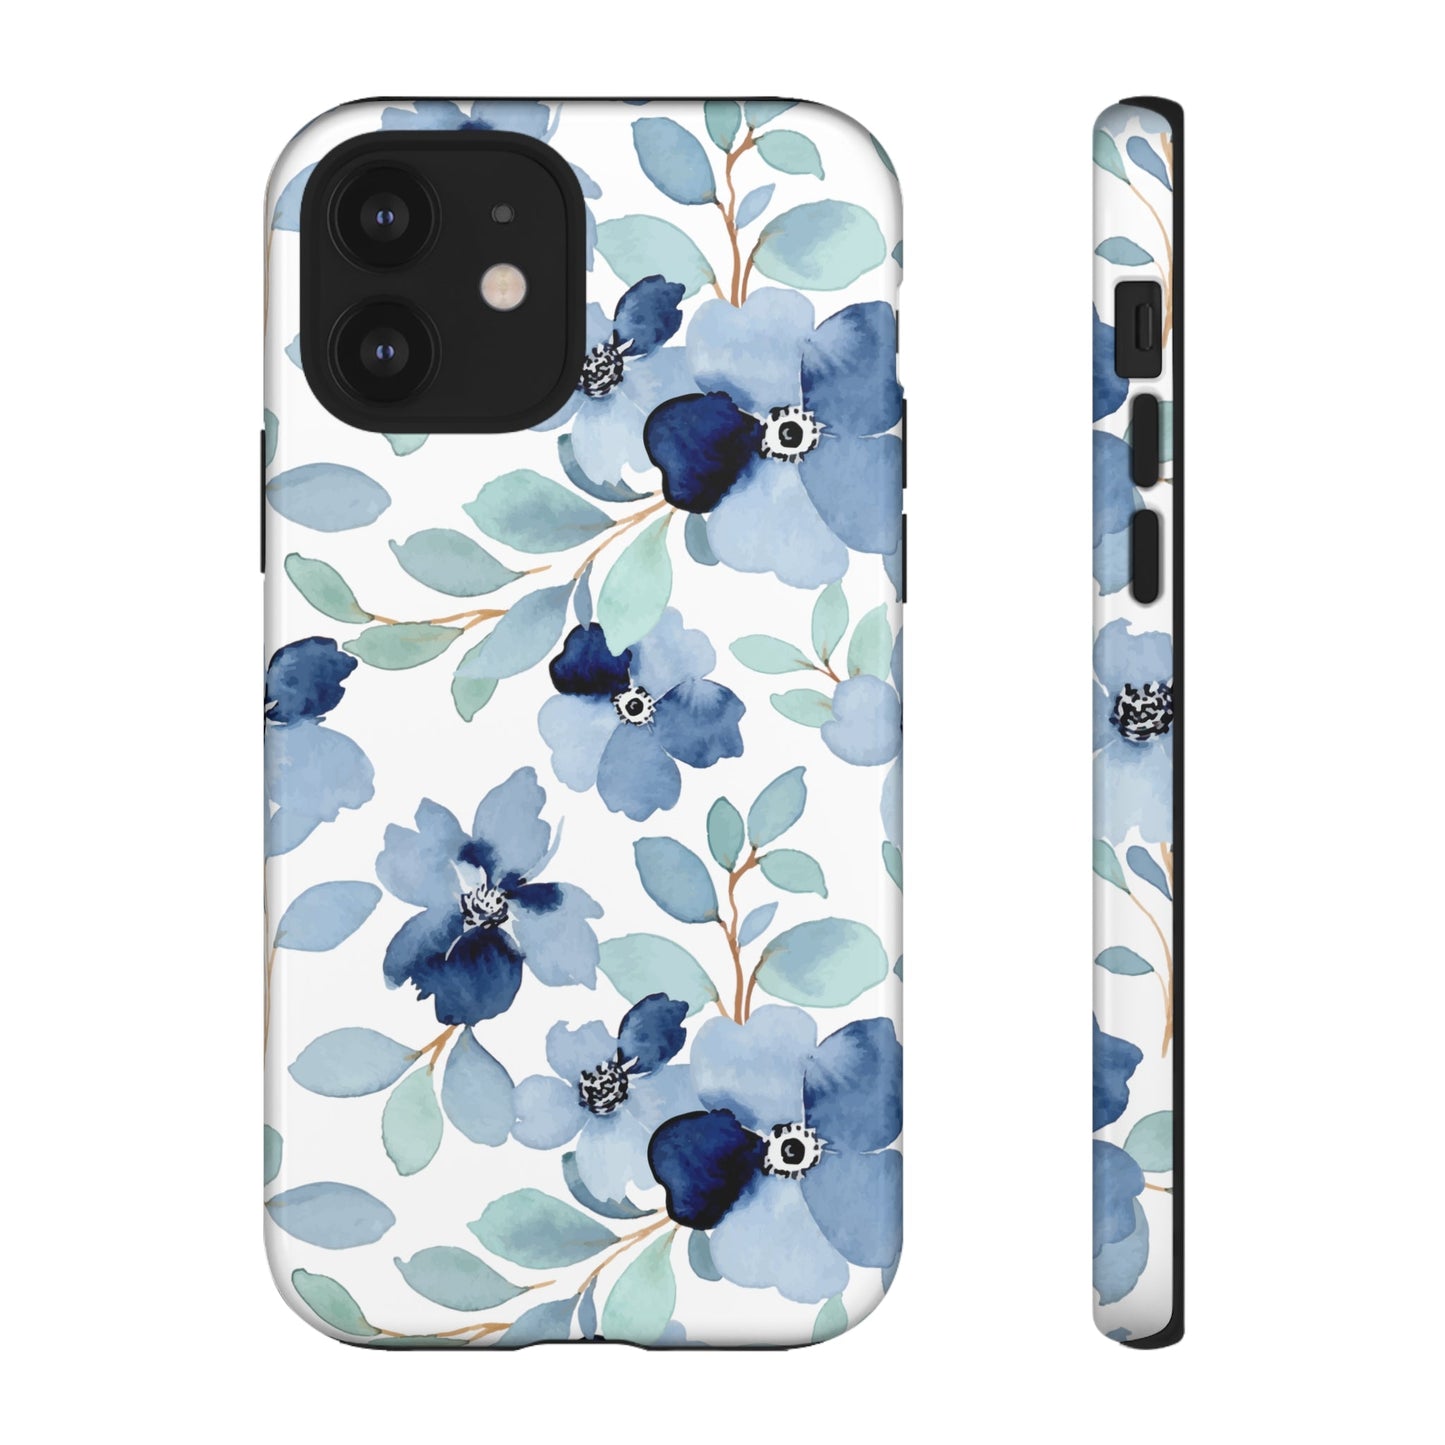 Load image into Gallery viewer, Phone case fits devices iPhone Samsung Galaxy Google Pixel - Cheerful Lane
